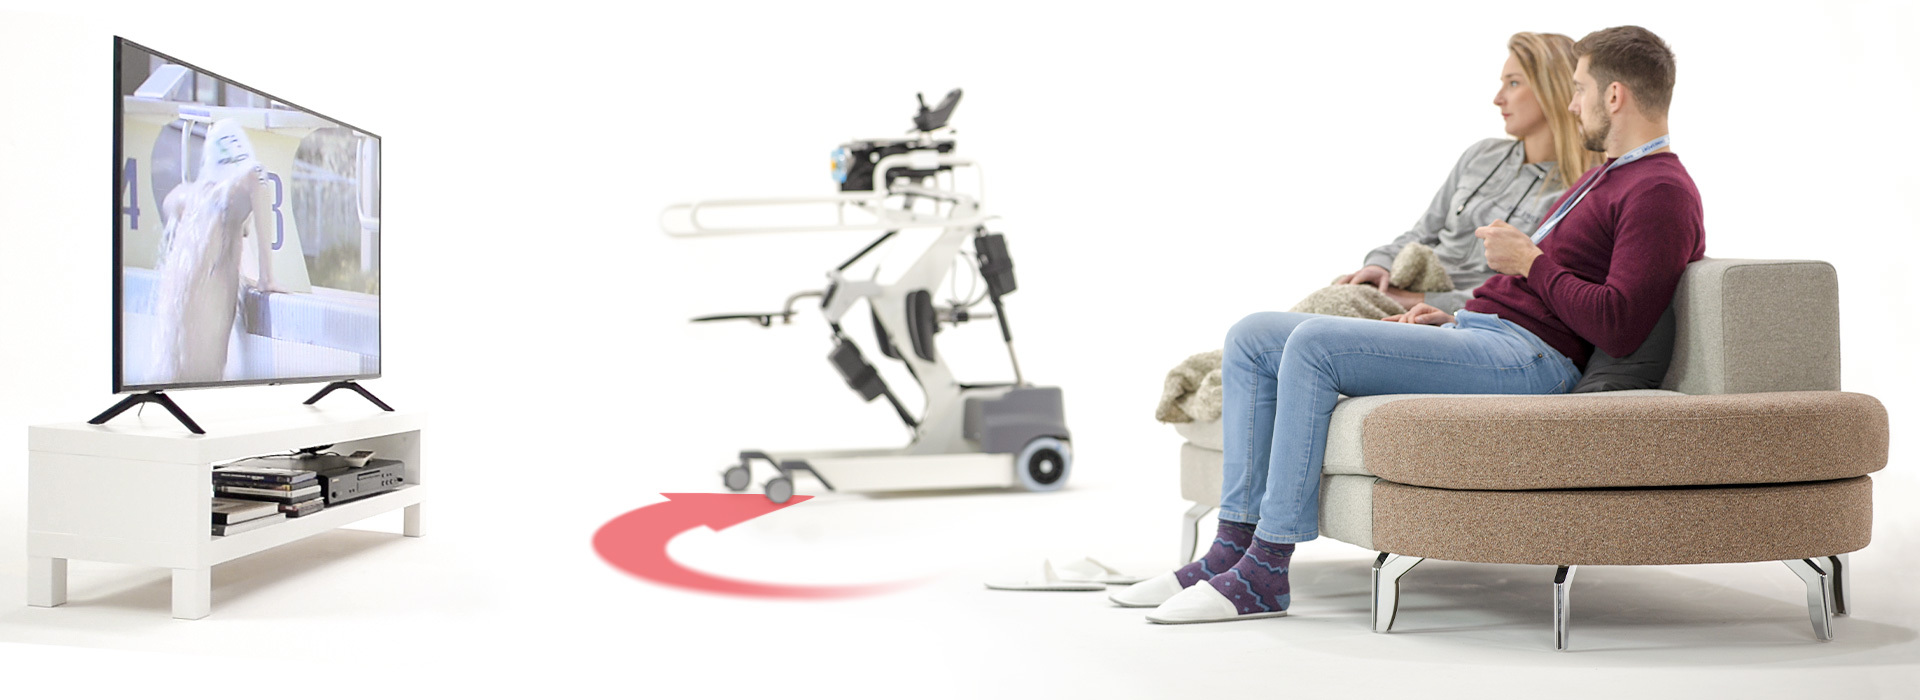 The Struzzo aid with remote control, for standing and mobility